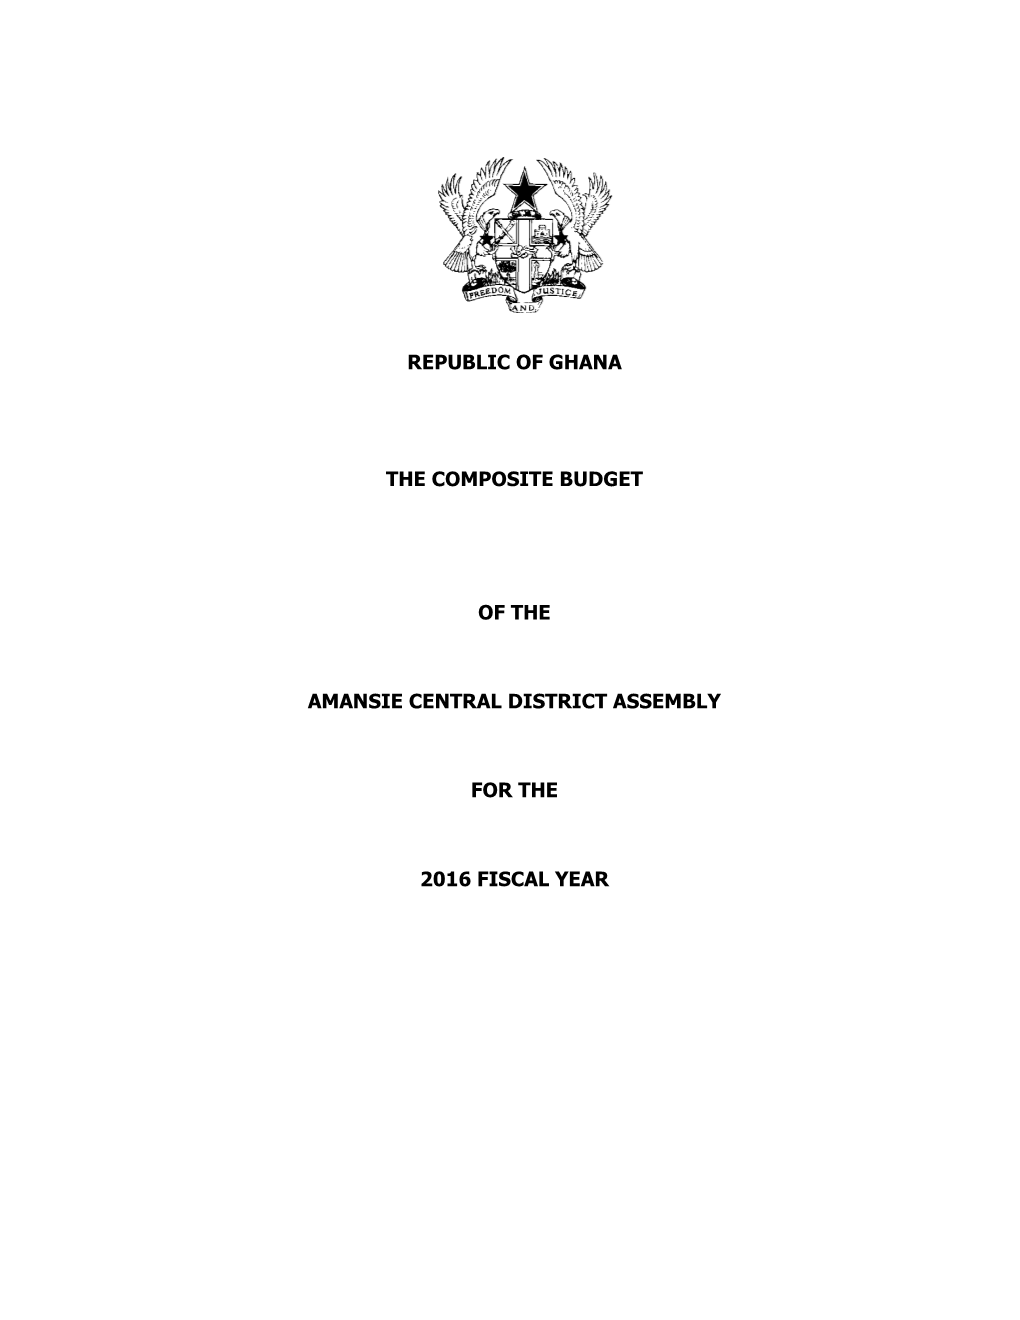 Republic of Ghana the Composite Budget of the Amansie Central District Assembly for the 2016 Fiscal Year